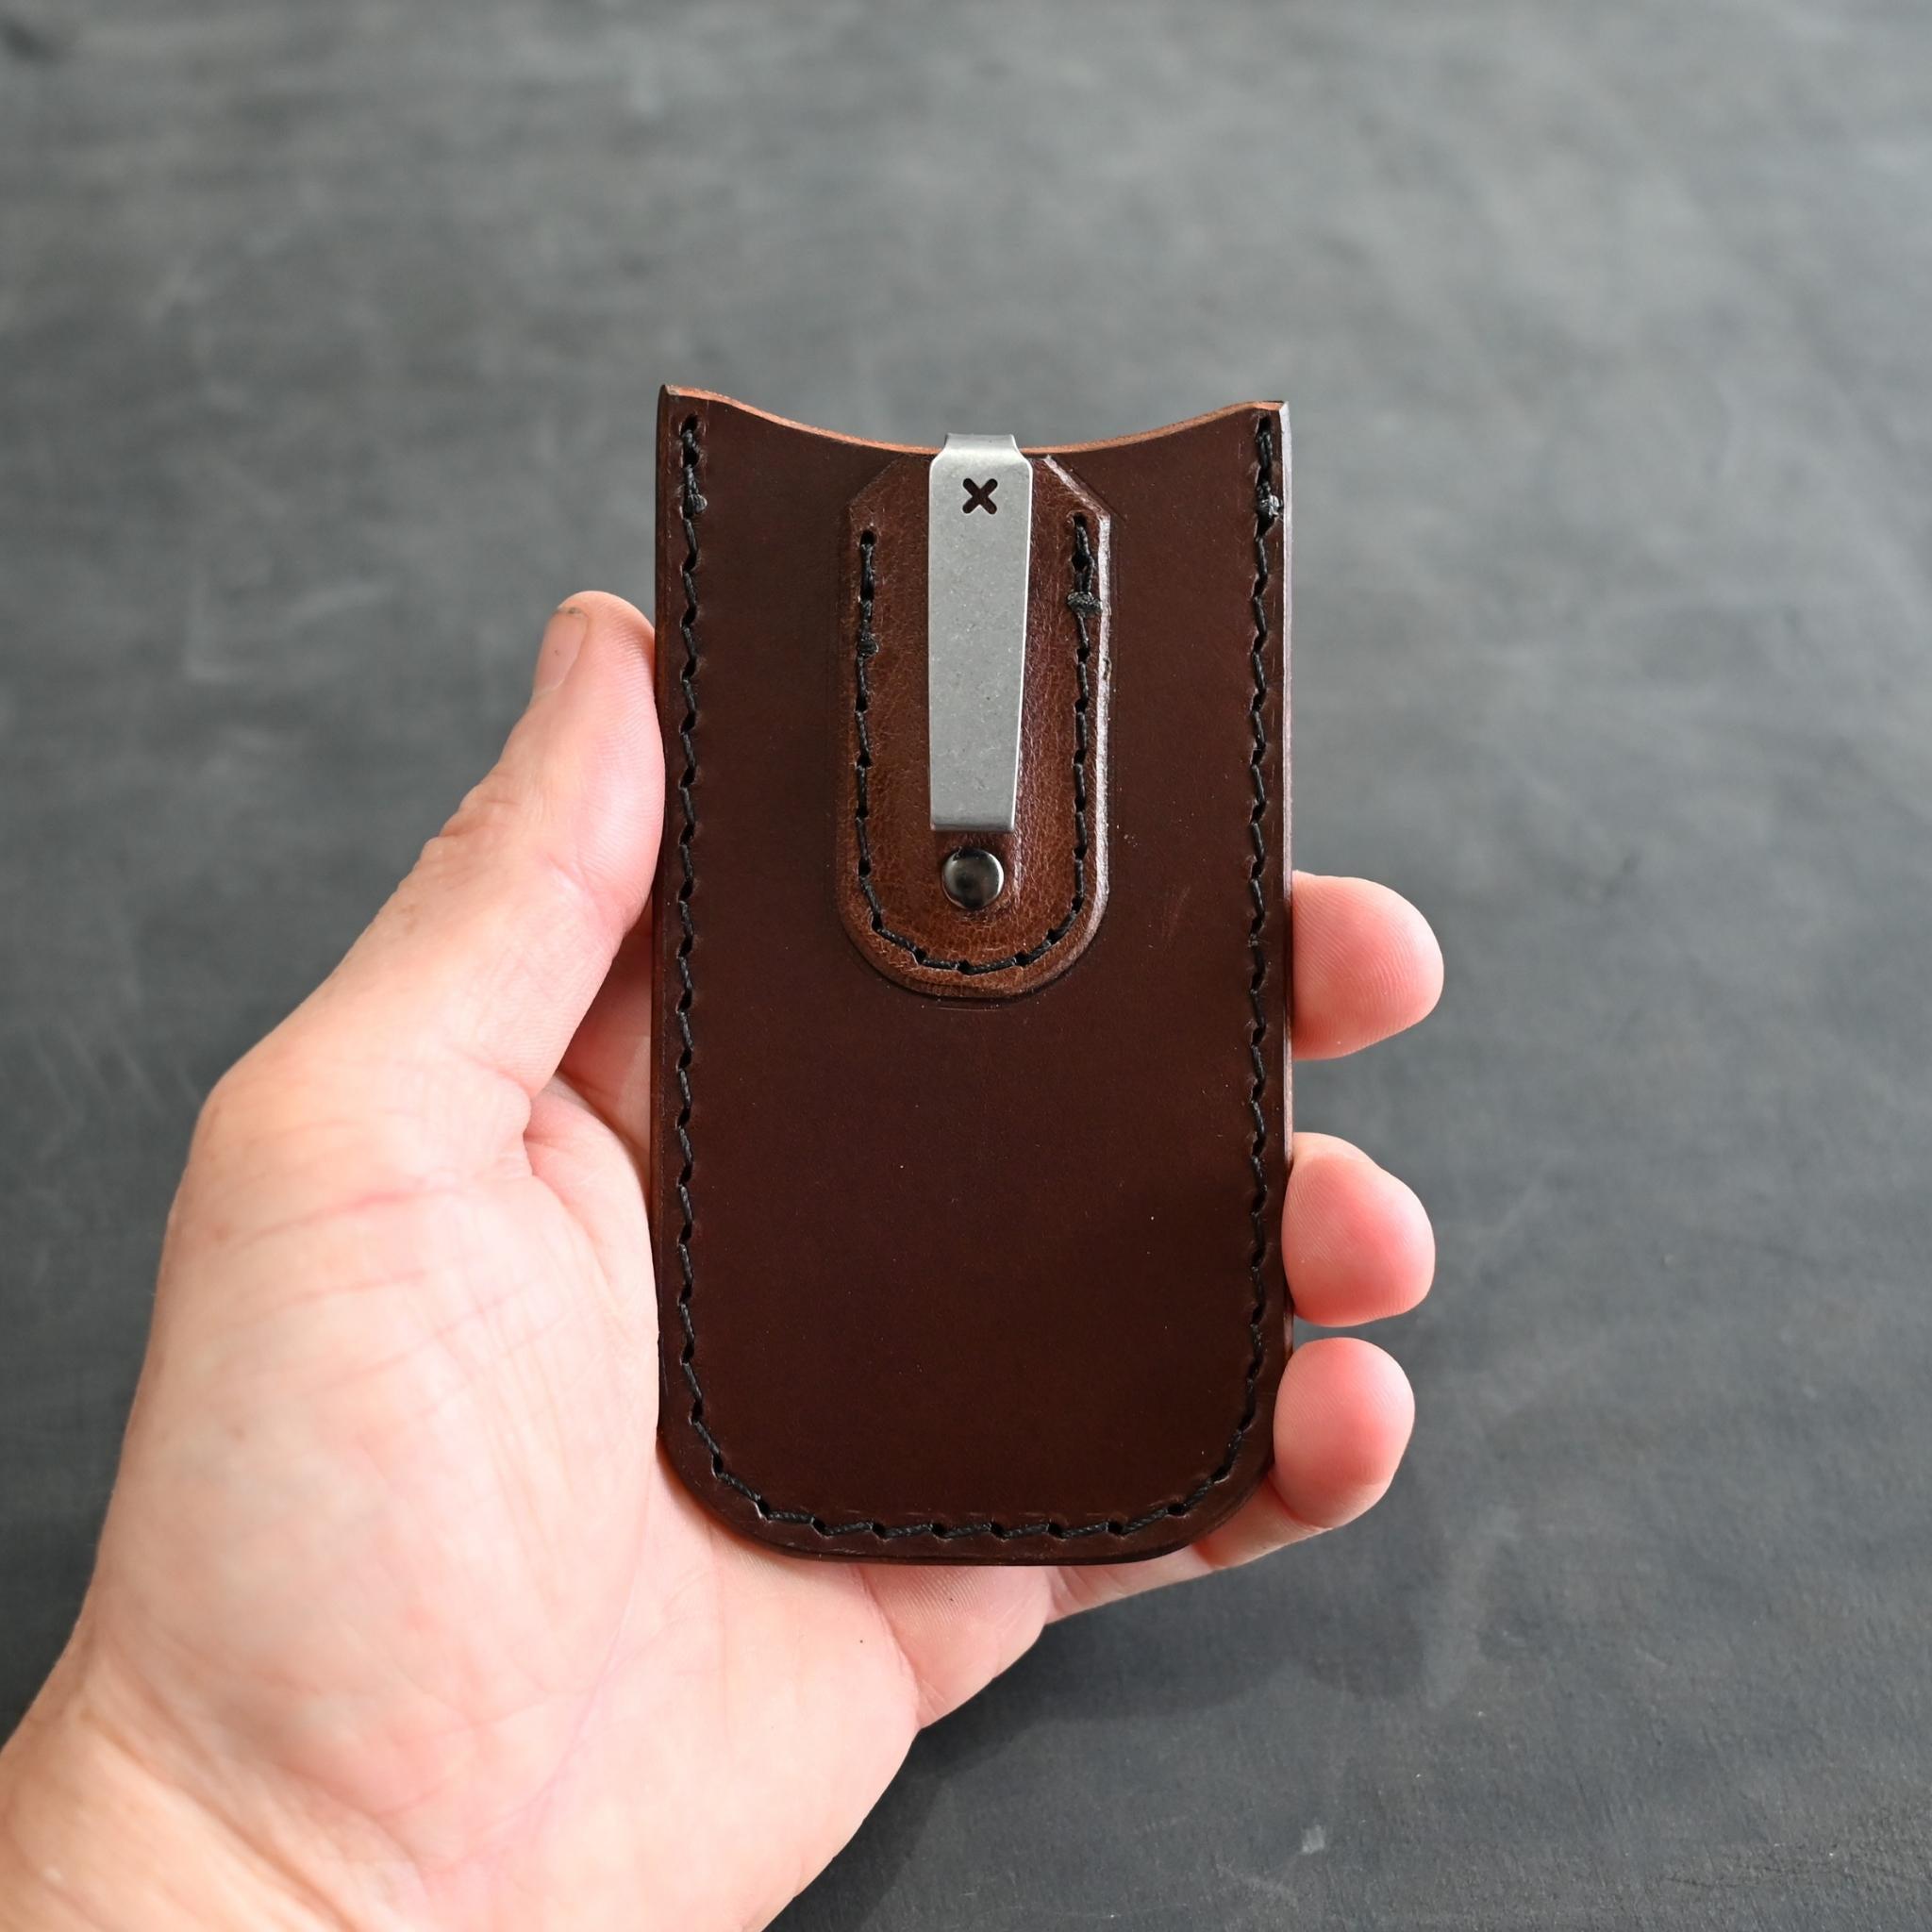 Clipped Leather Pocket Slip